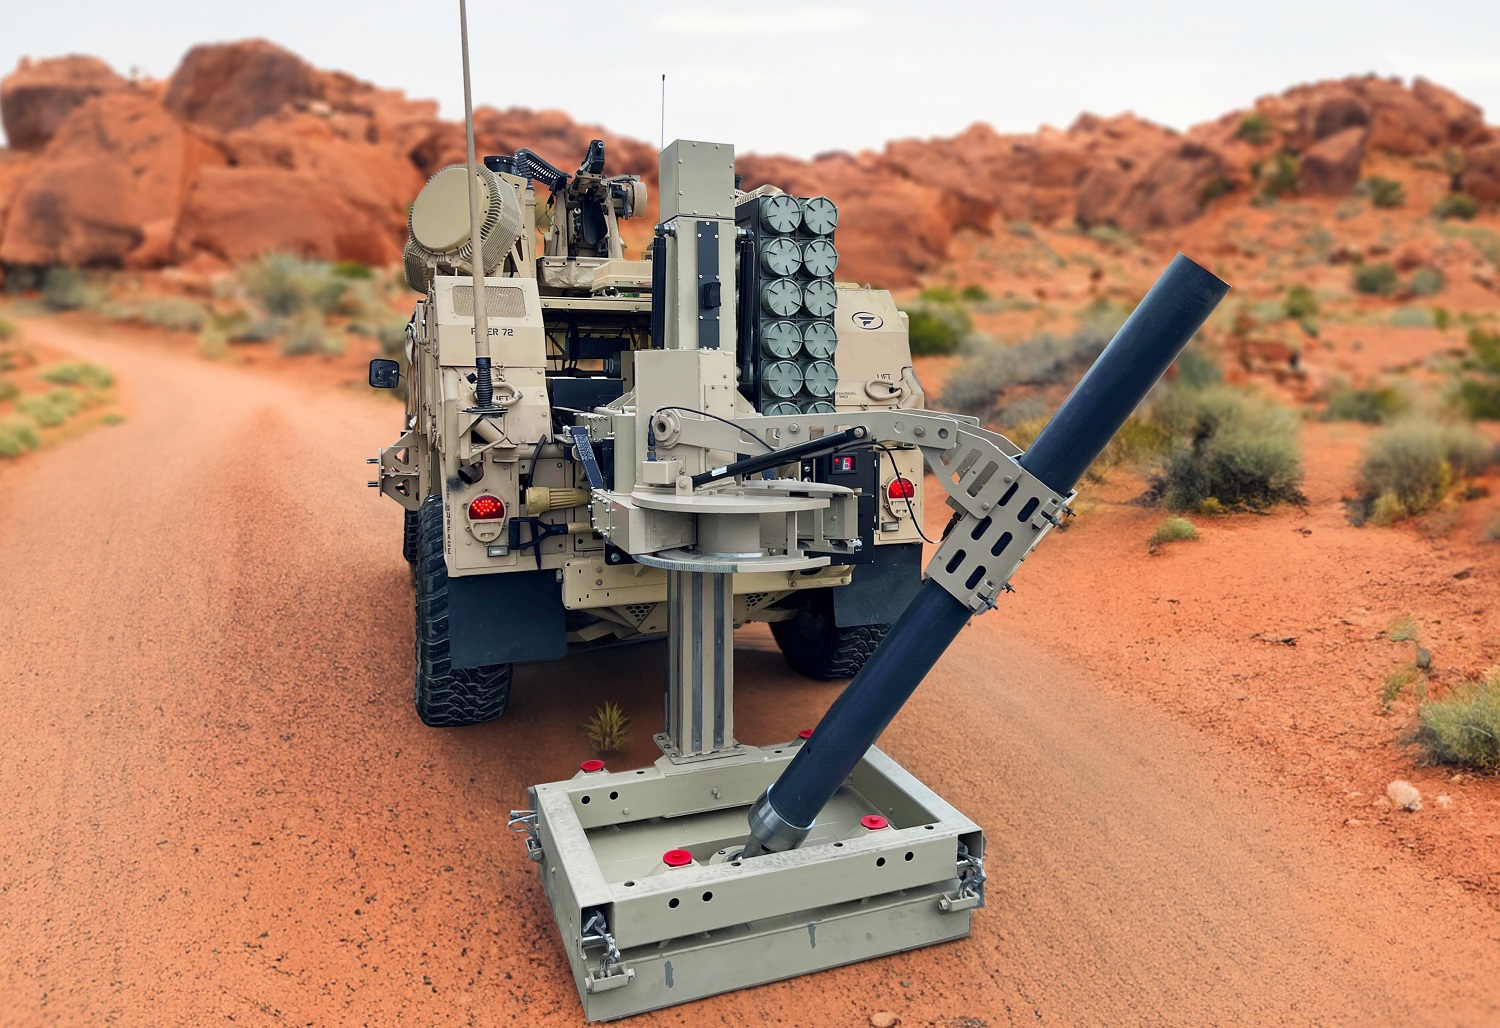 Flyer 72 Multi-Purpose Mobile Fire Support System